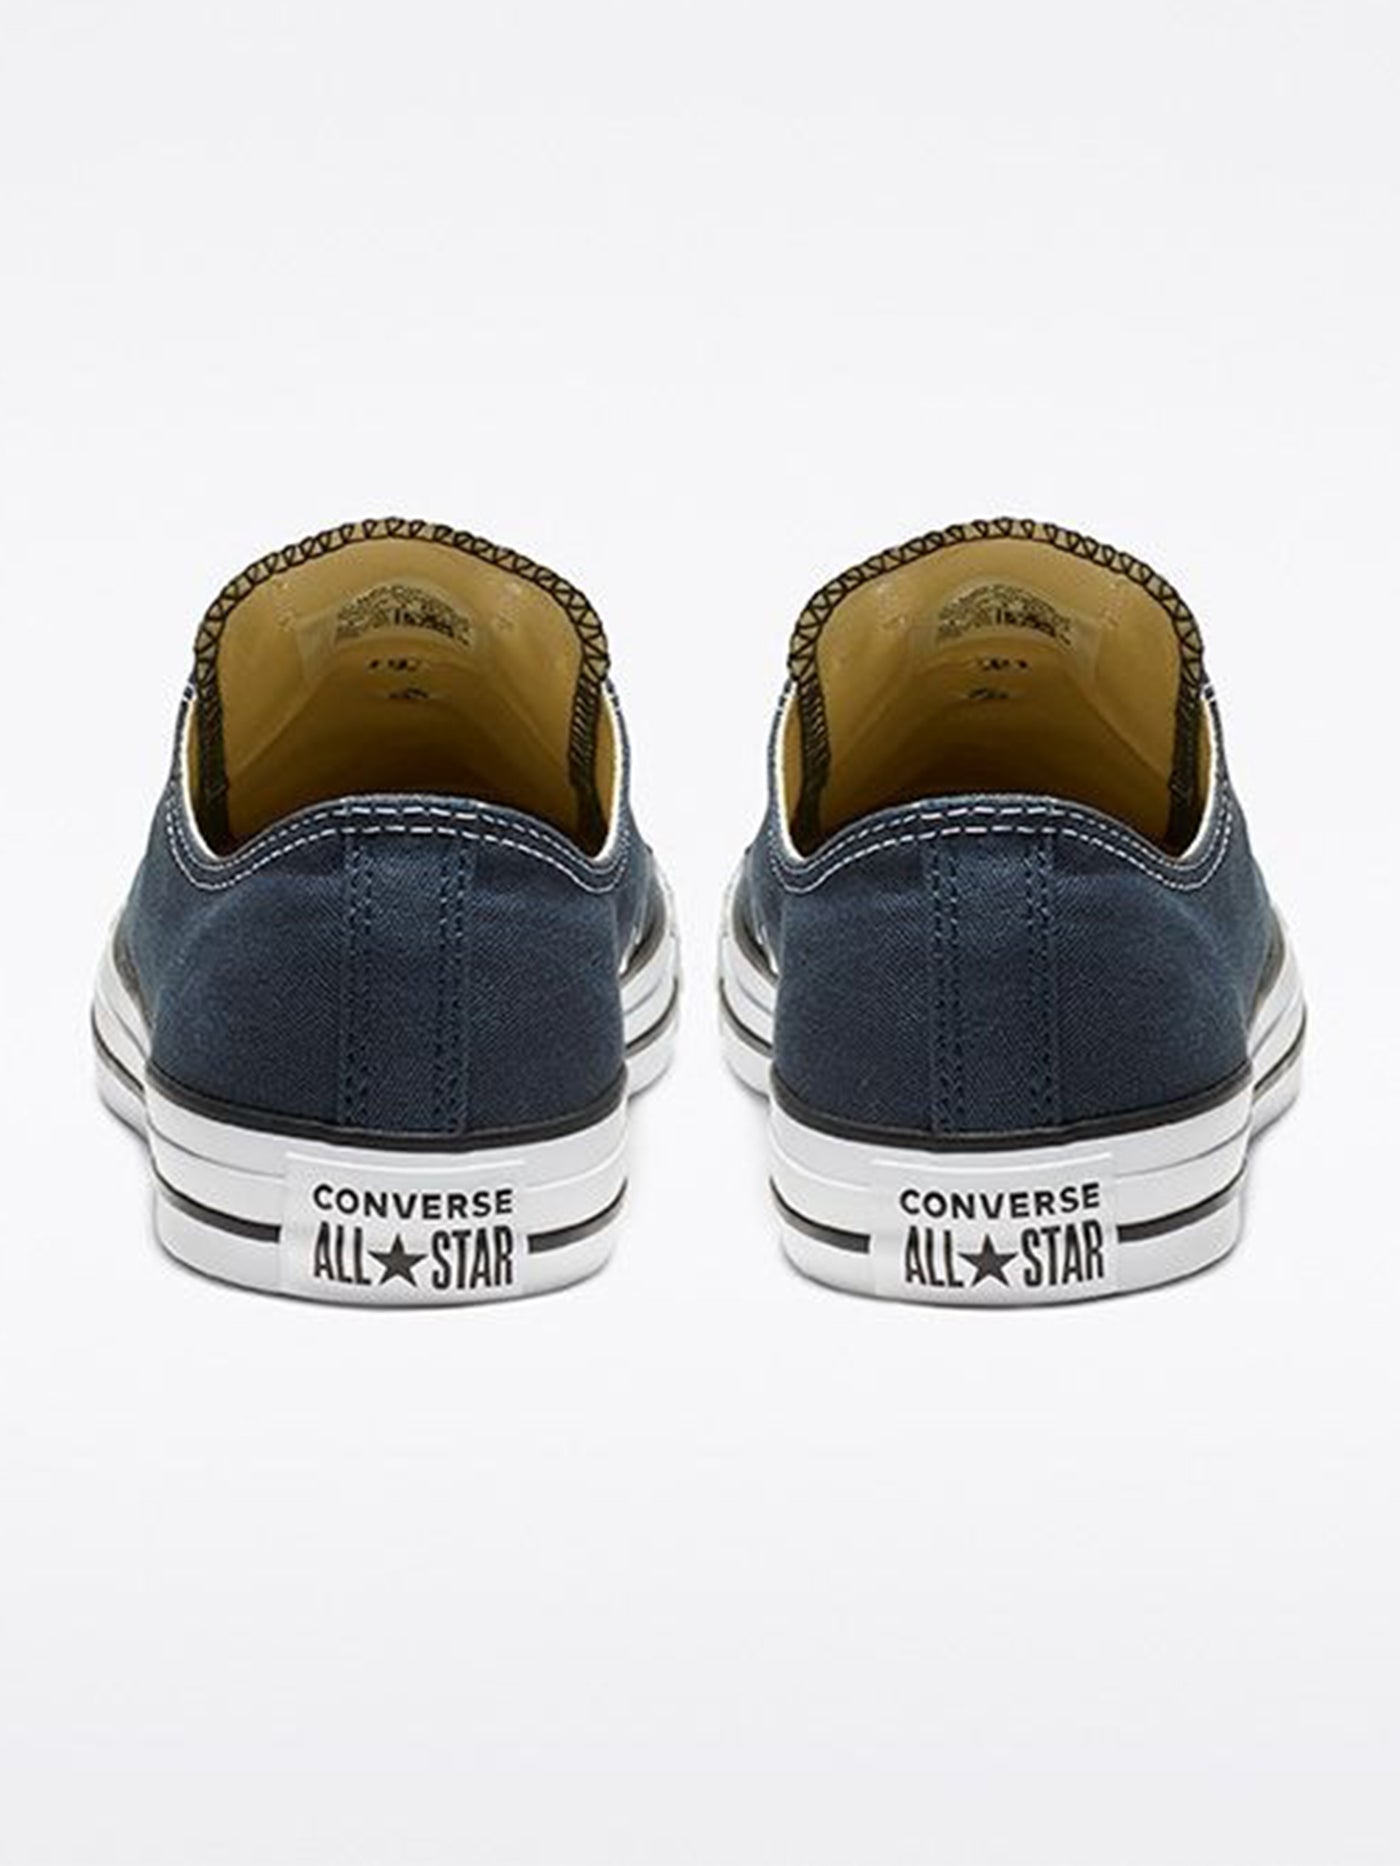 Converse Chuck Taylor All Star Navy Shoes